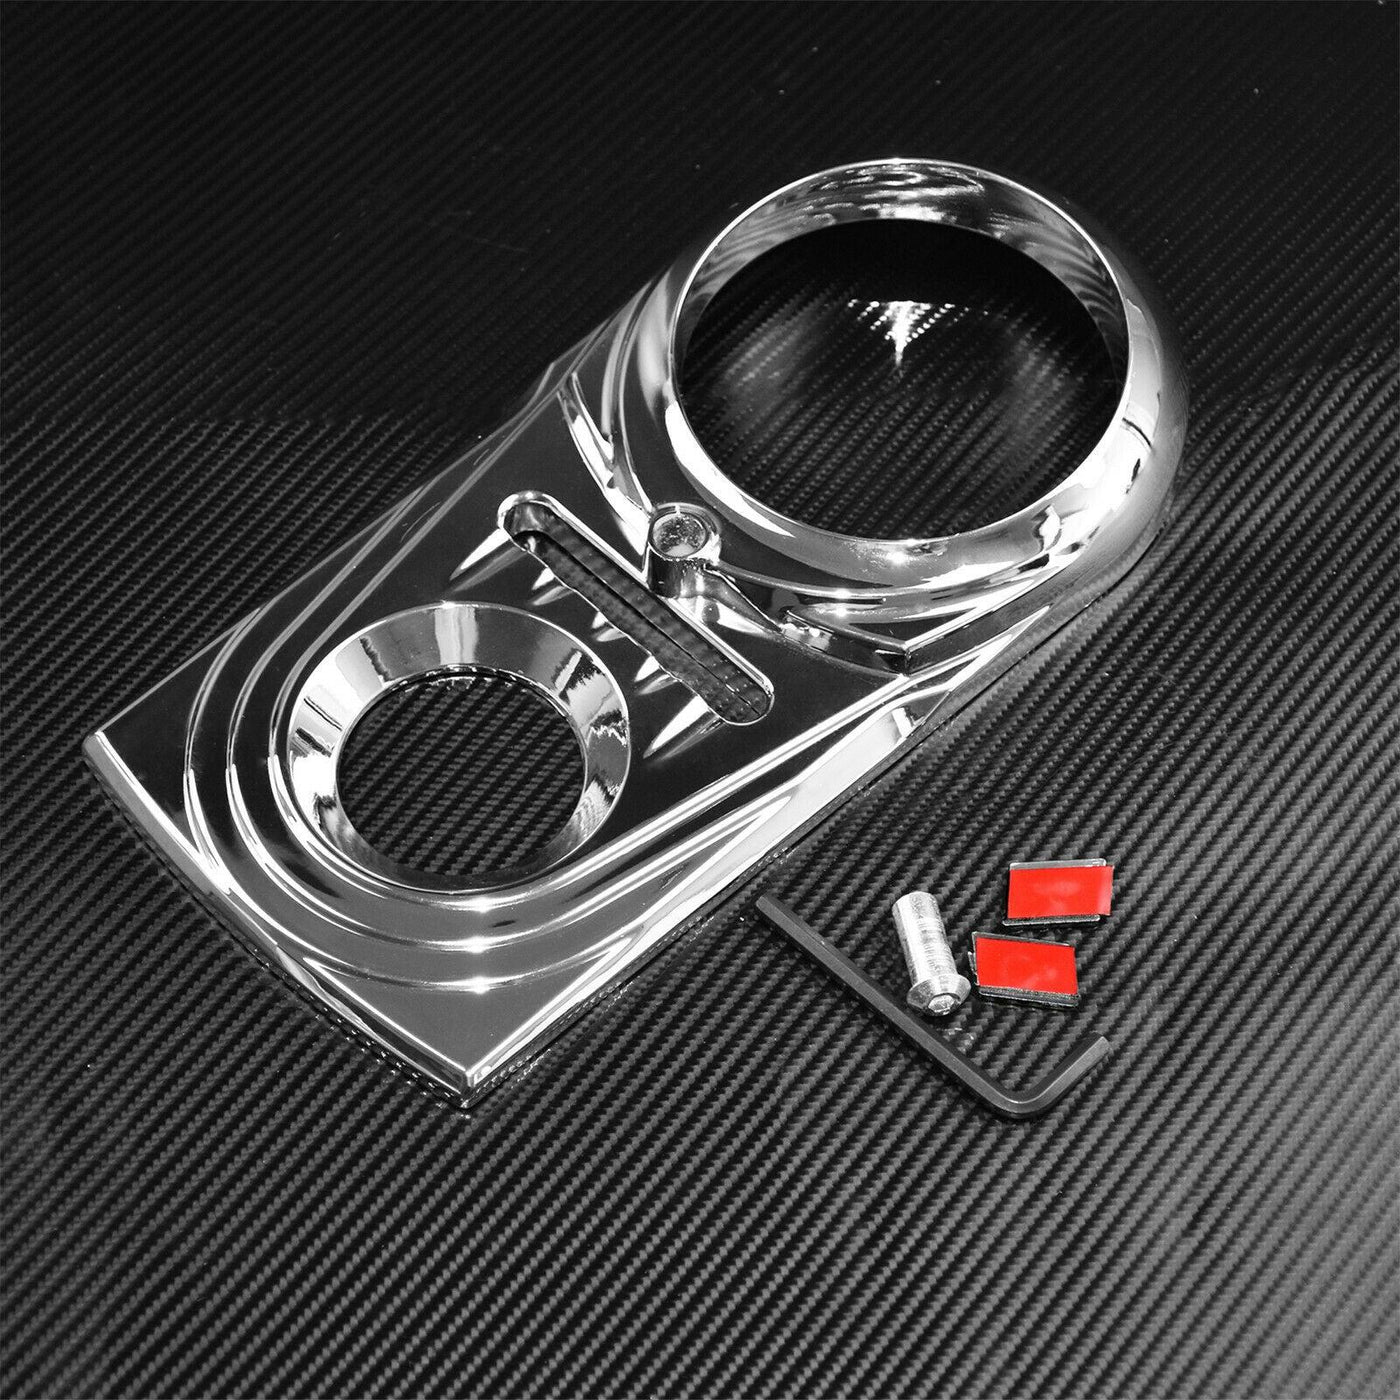 Chrome Dash Panel Insert Cover Fit For Harley Softail Dyna FXDWG FXSTC 1993-2015 - Moto Life Products